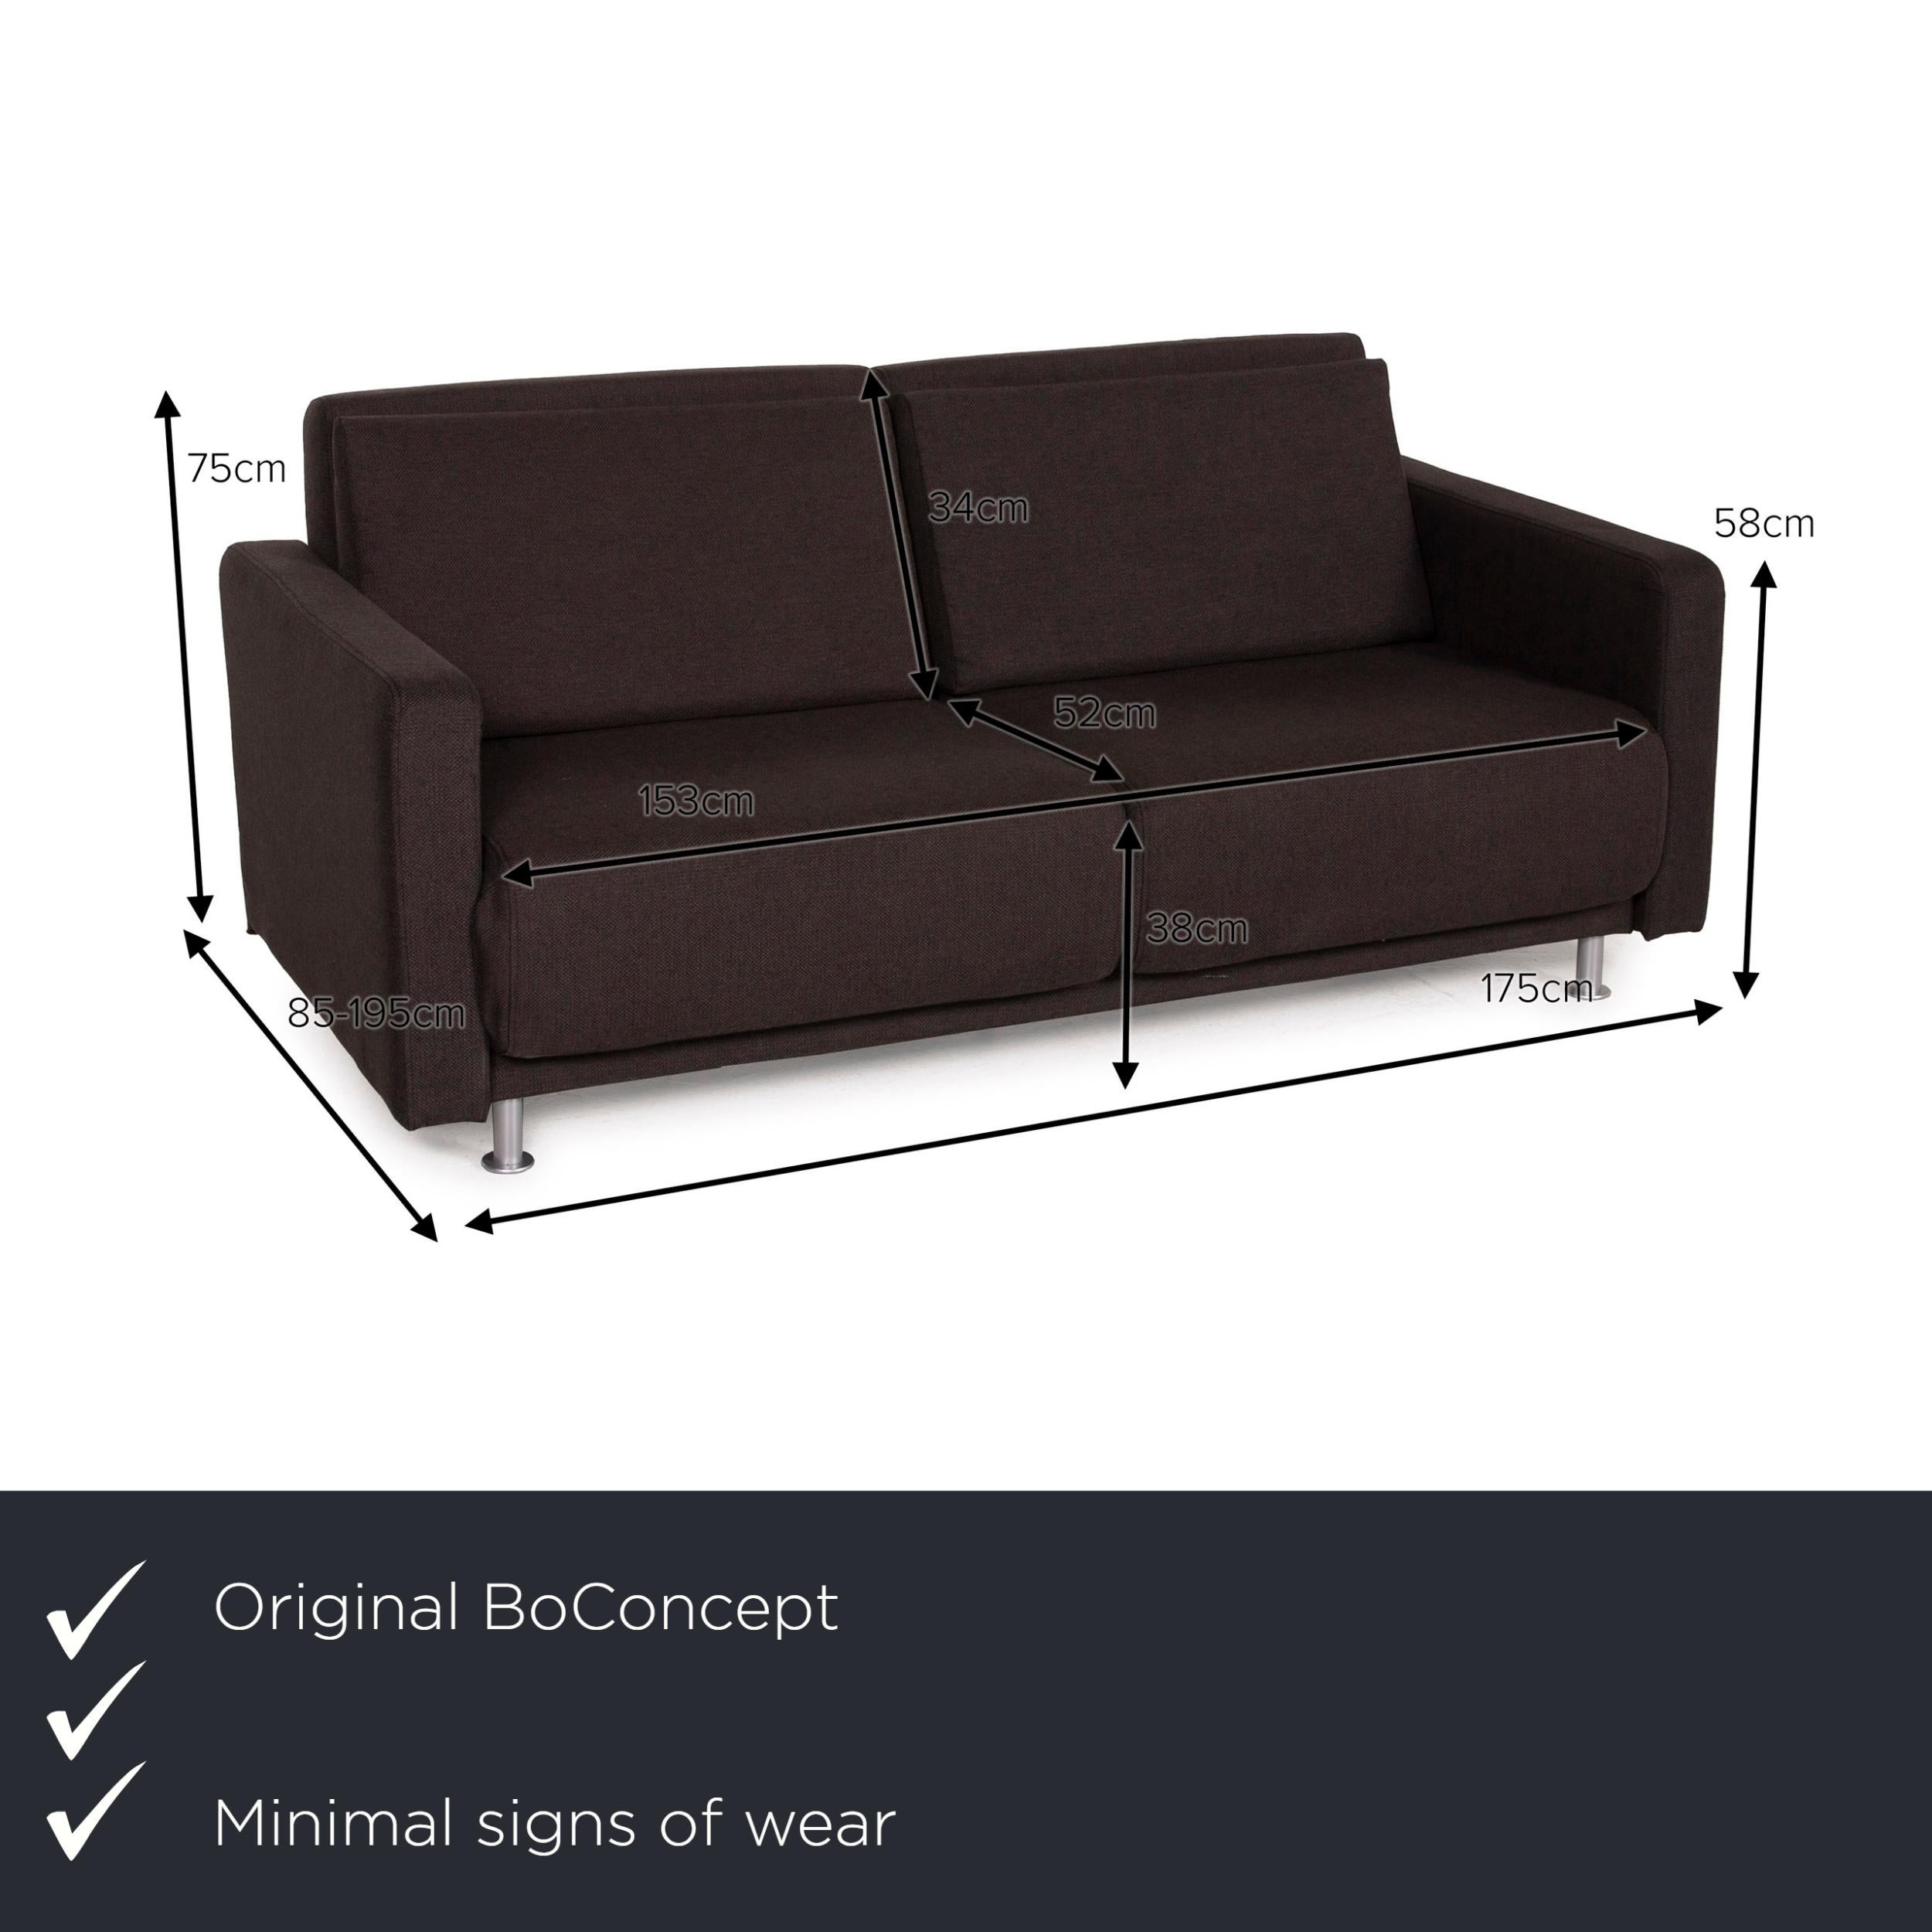 We present to you a BoConcept Melo fabric sofa brown two-seater relax function sofa bed dark brown.
  
 

 Product measurements in centimeters:
 

 depth: 85
 width: 175
 height: 75
 seat height: 38
 rest height: 58
 seat depth: 55
